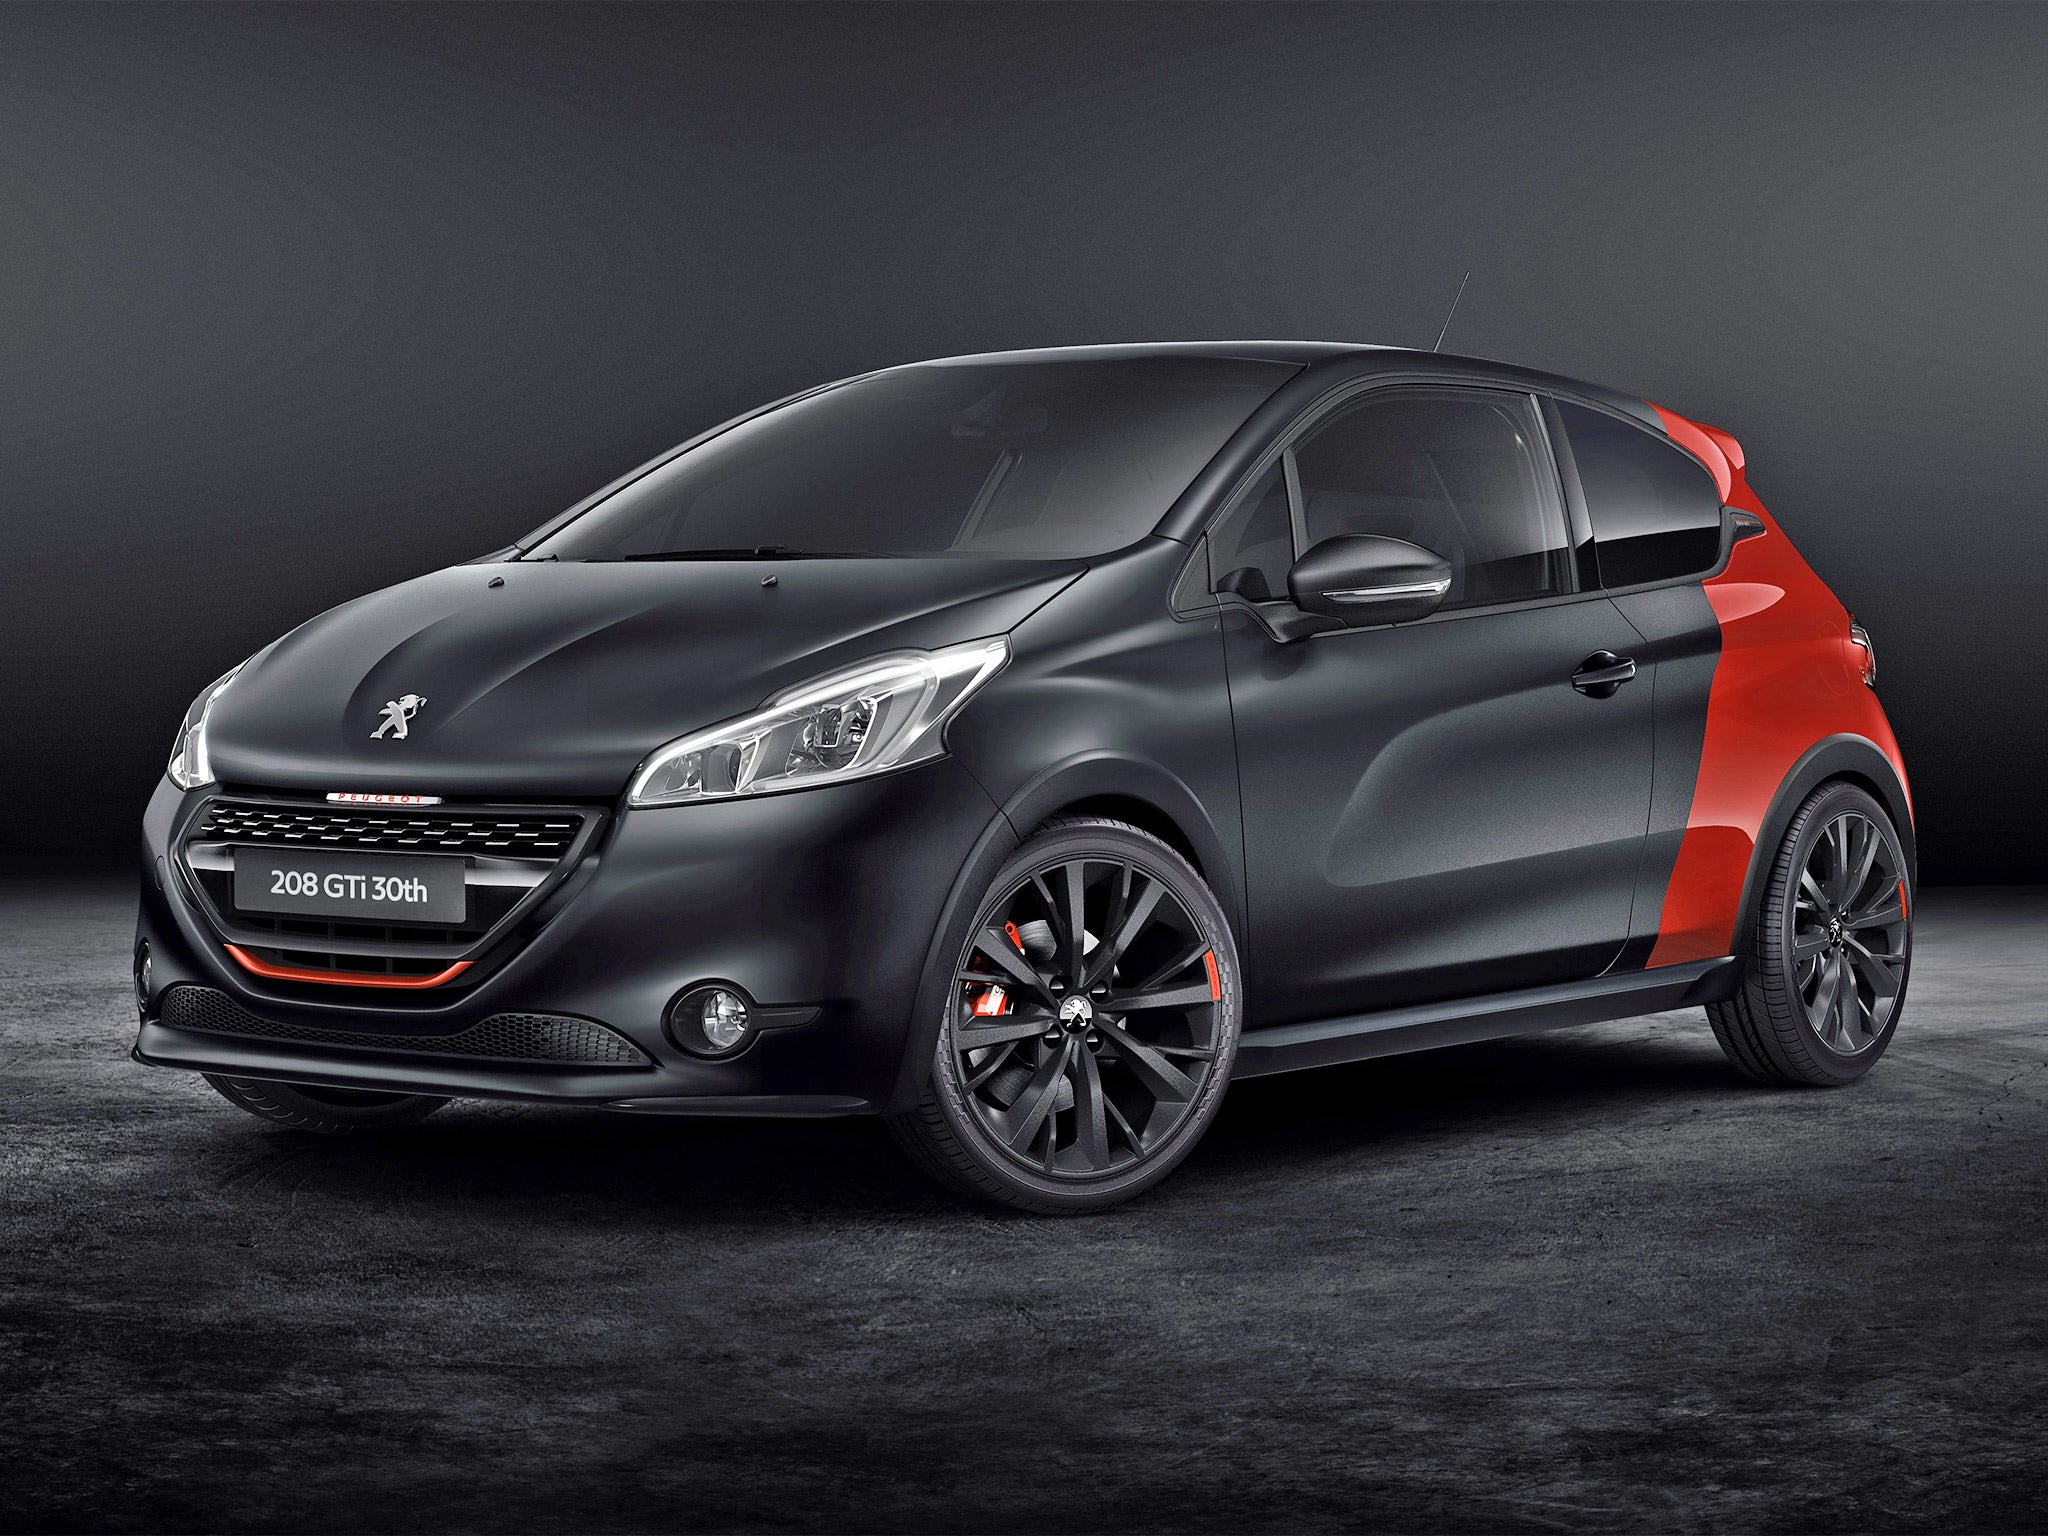 Hard going: the new Peugeot 208 GTI